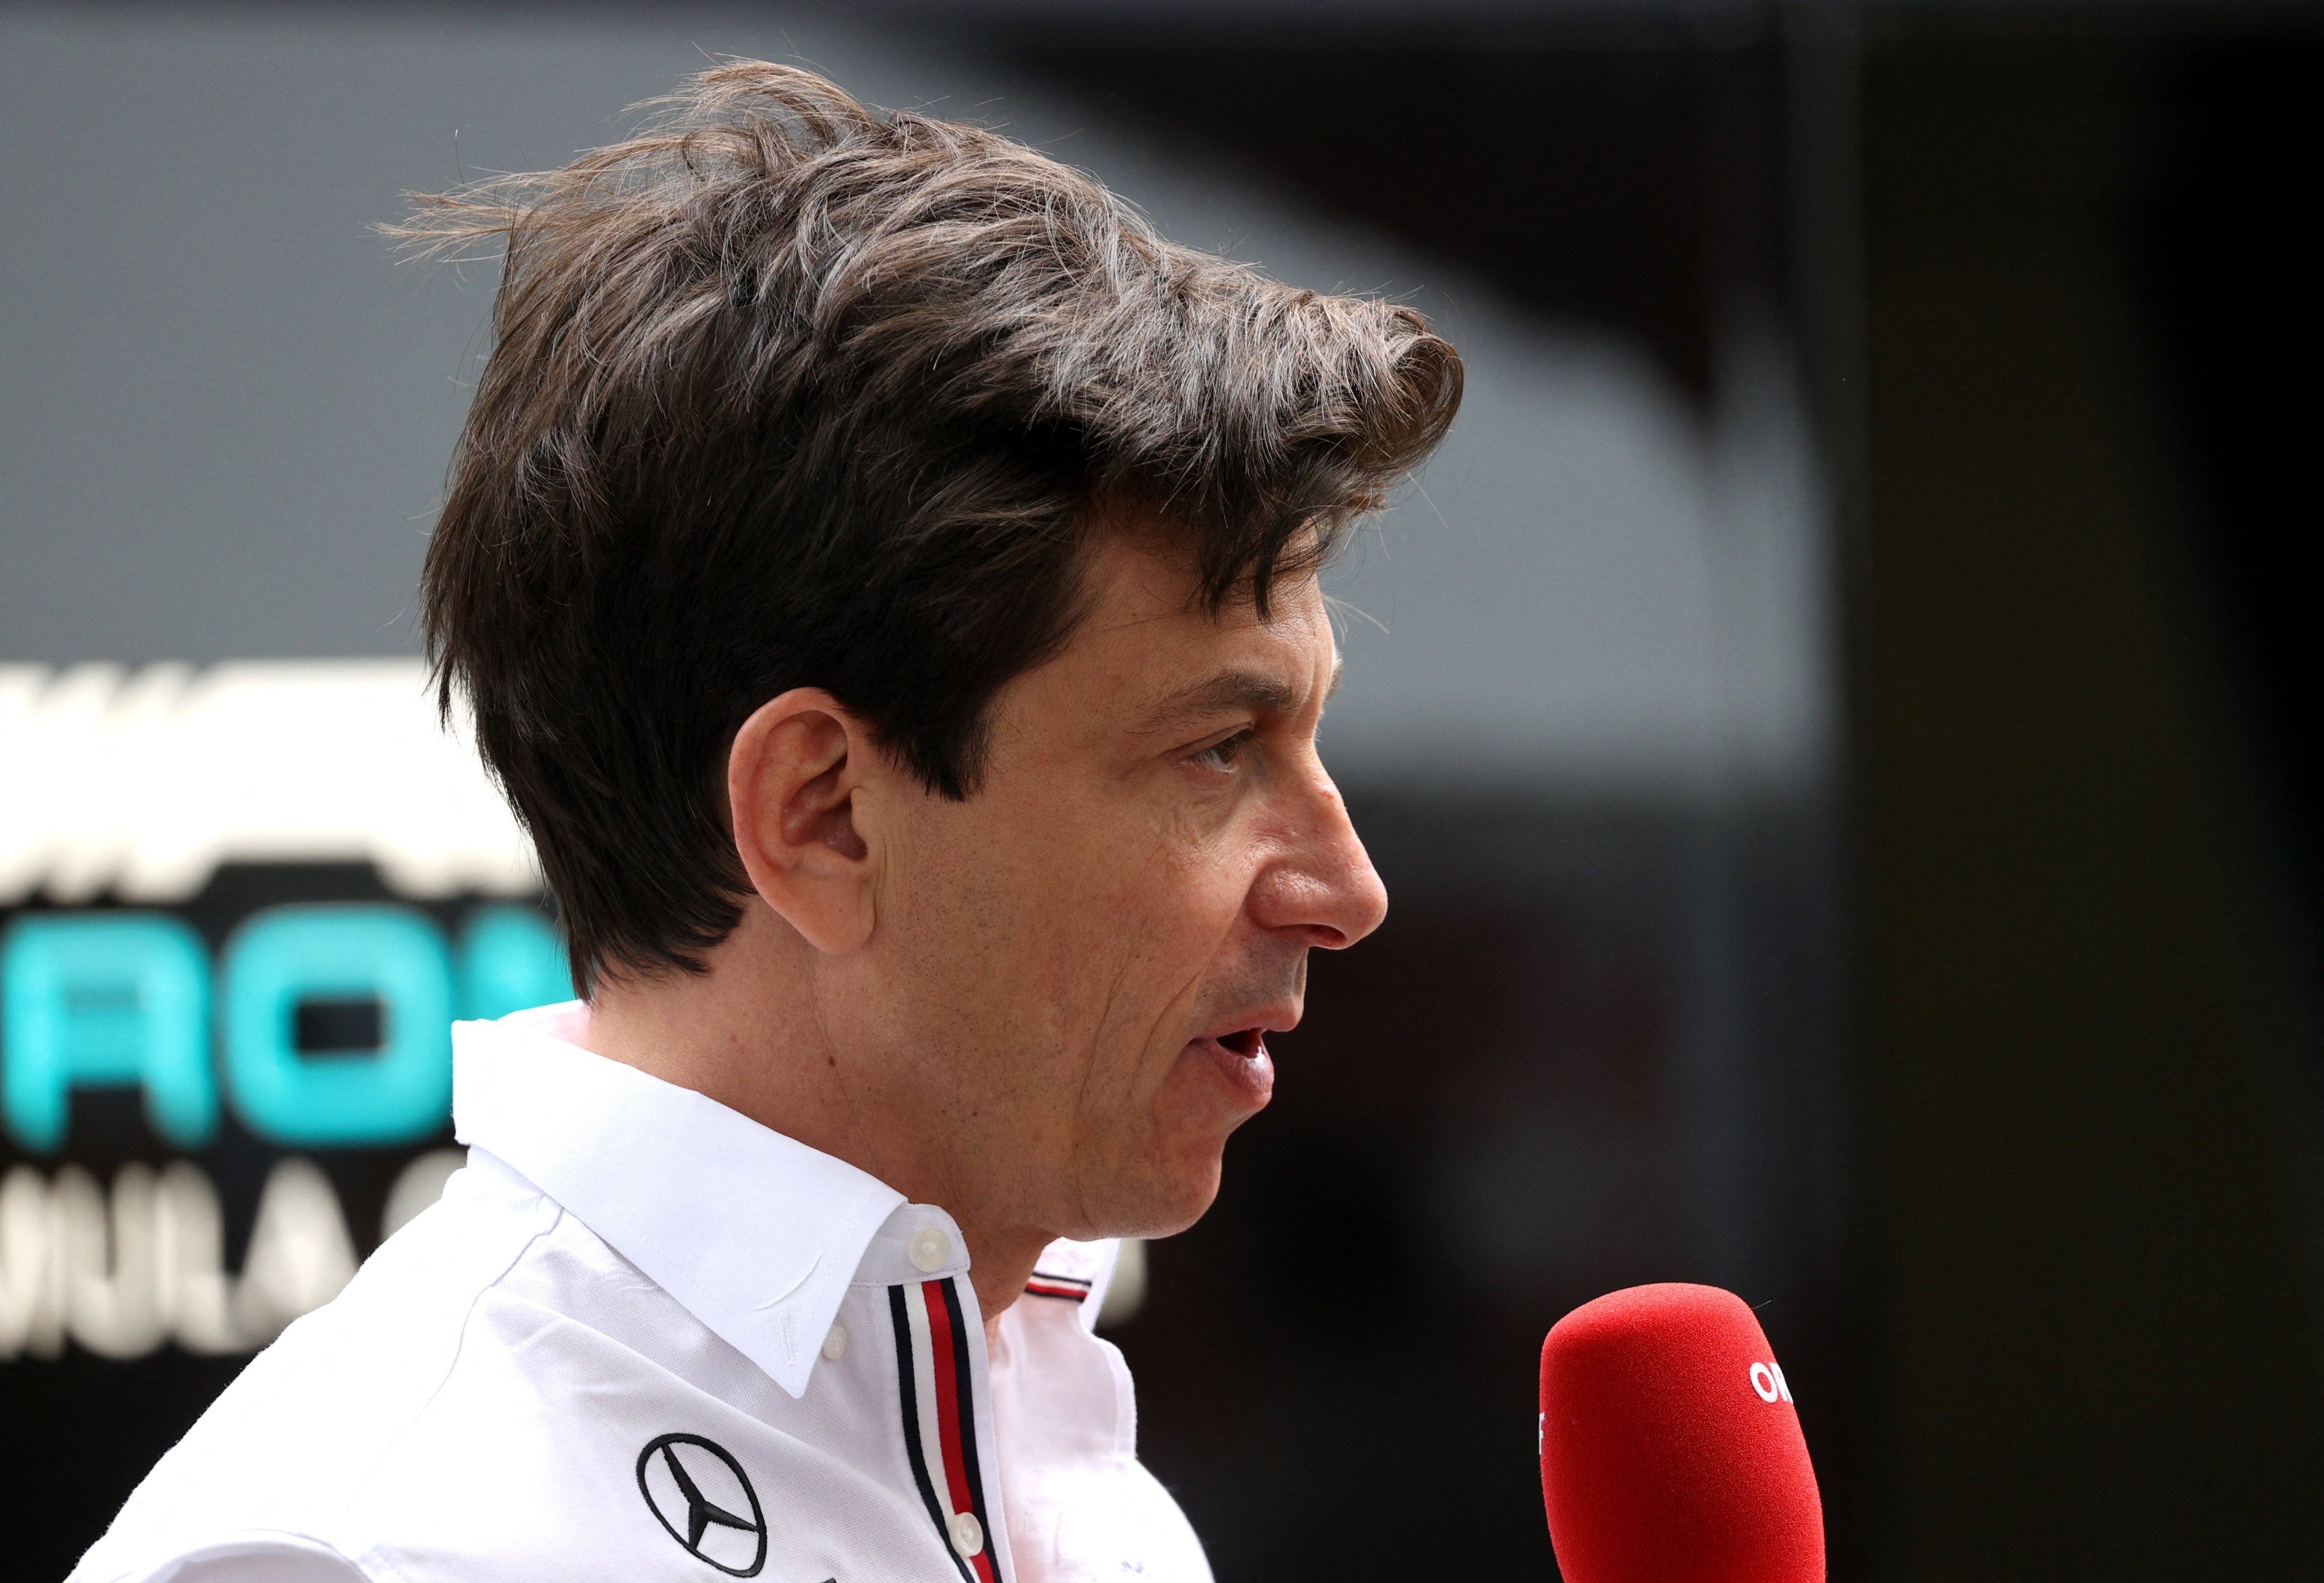 Mercedes Team Principle Toto Wolff speaking at the Australian Grand Prix in Melbourne. Photo: Reuters